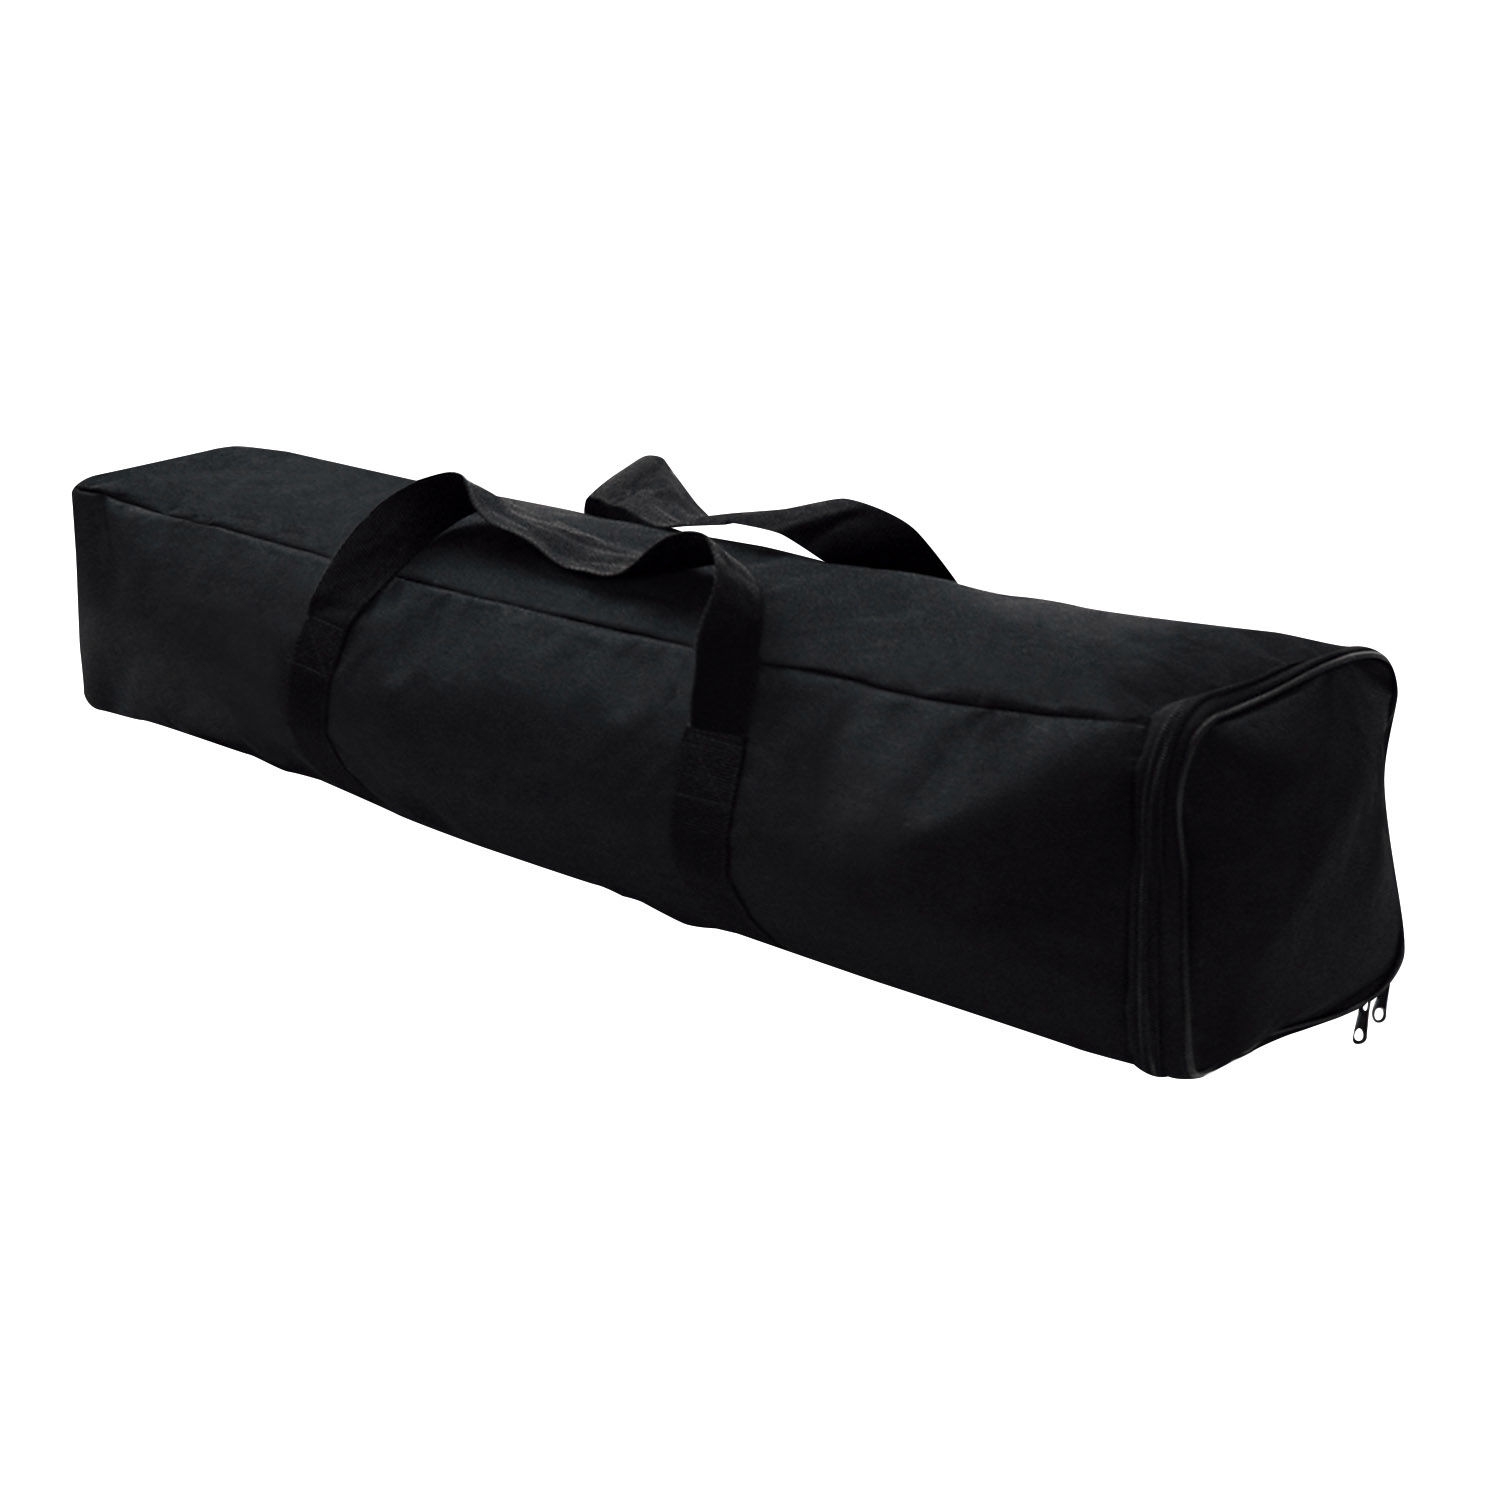 31.5" Soft Carry Case for Fabric Displays